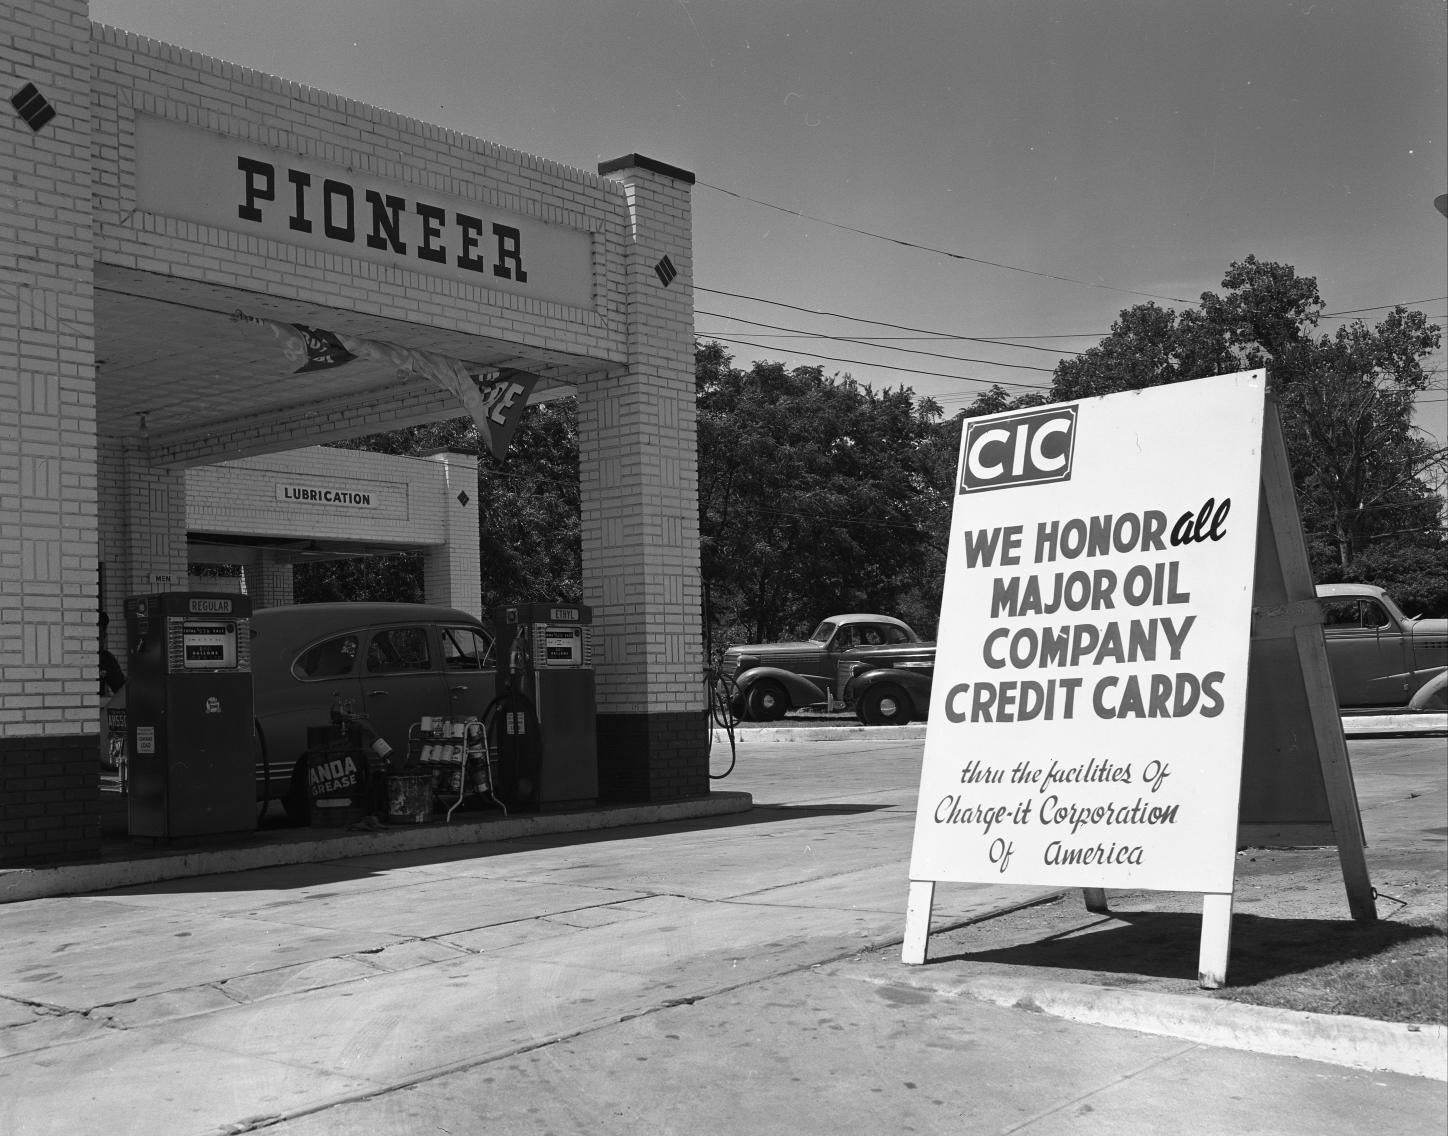 Pioneer Service Station with Car at Pump, 1956.